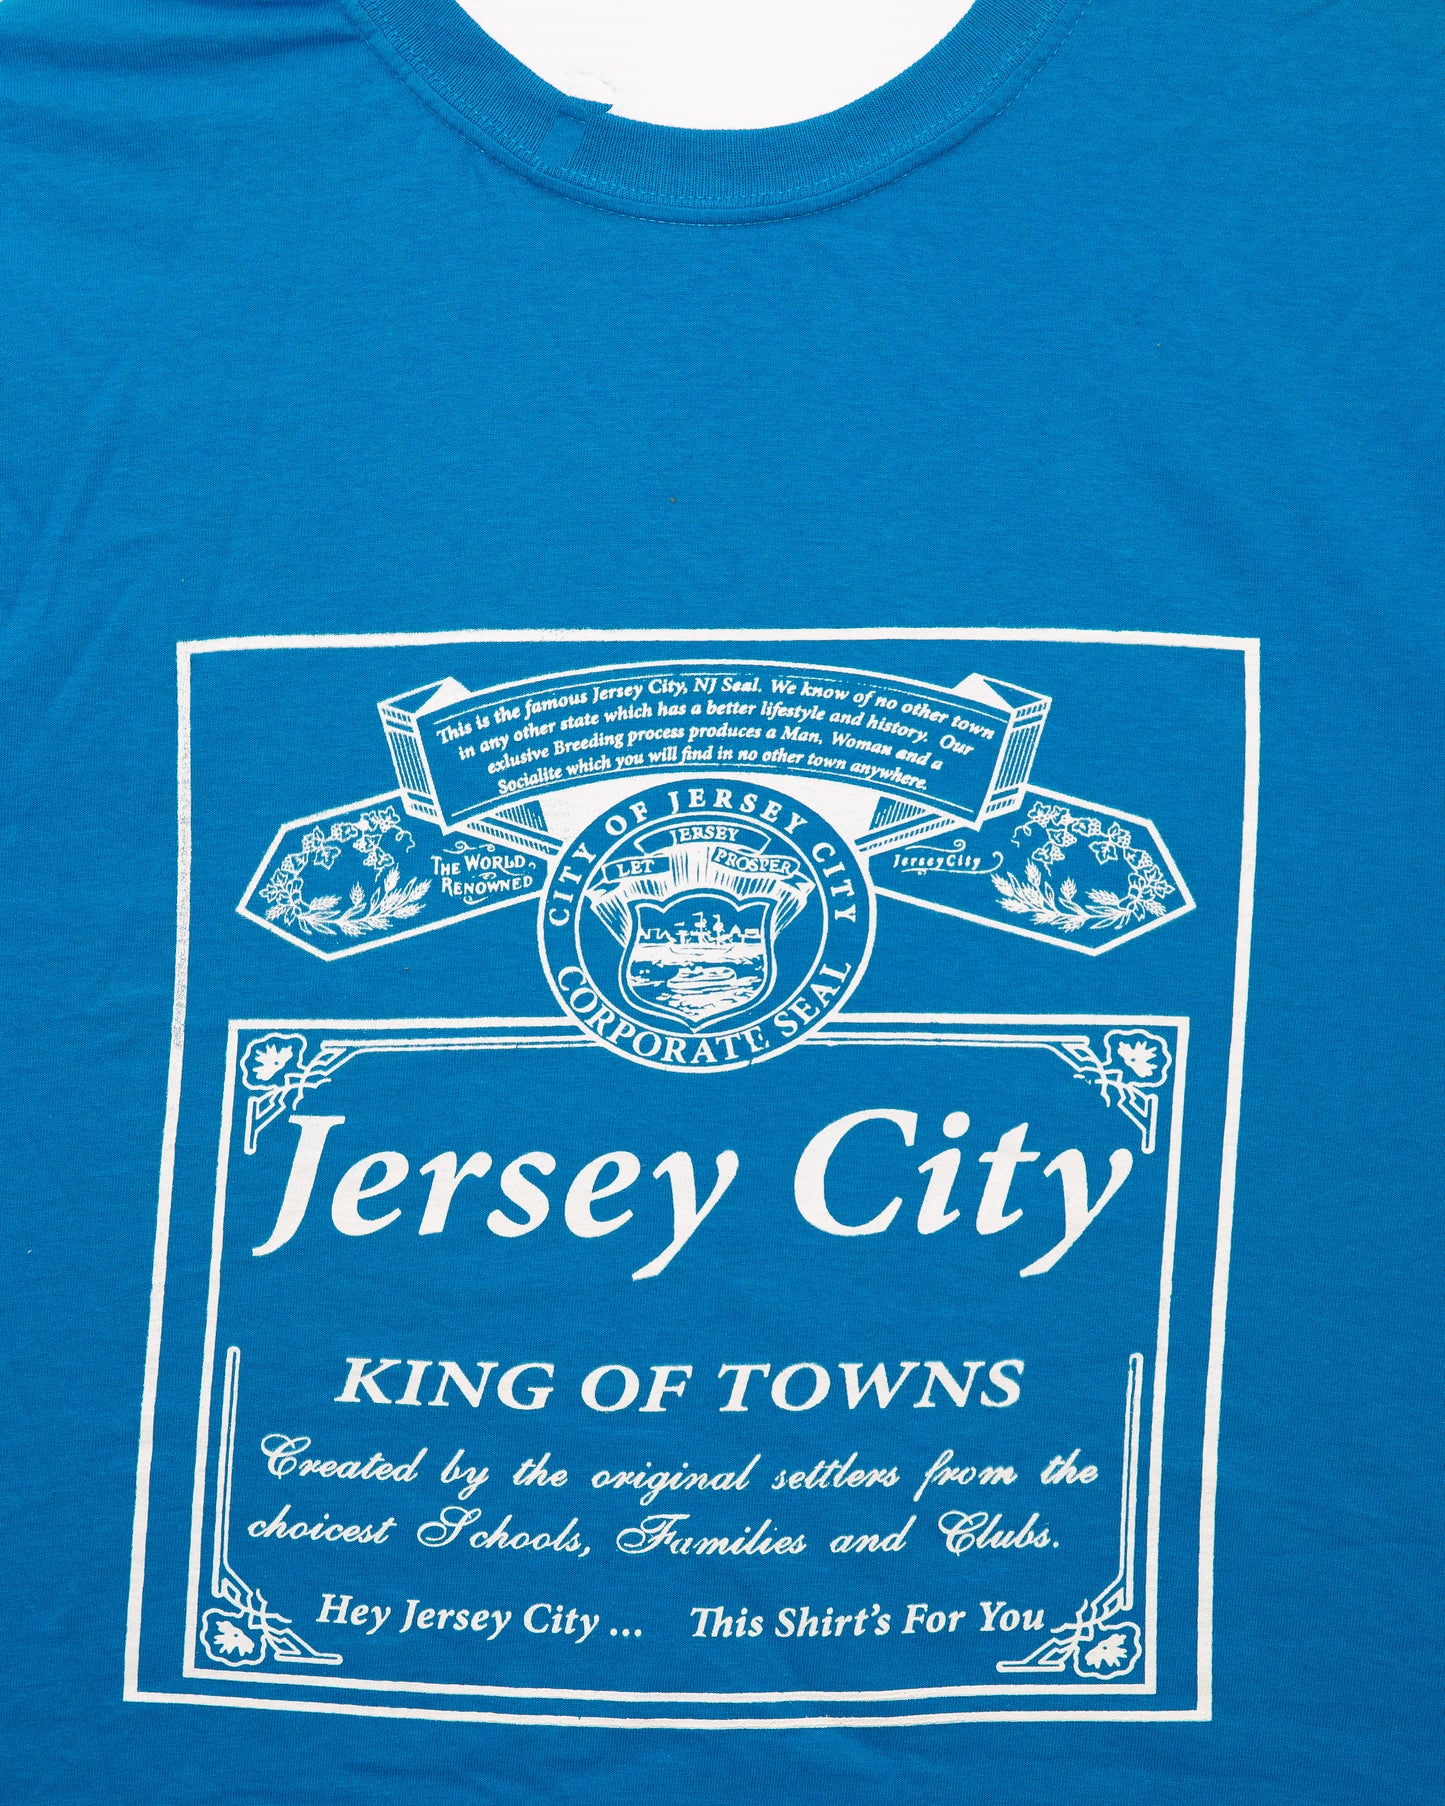 Jersey City- King of Towns